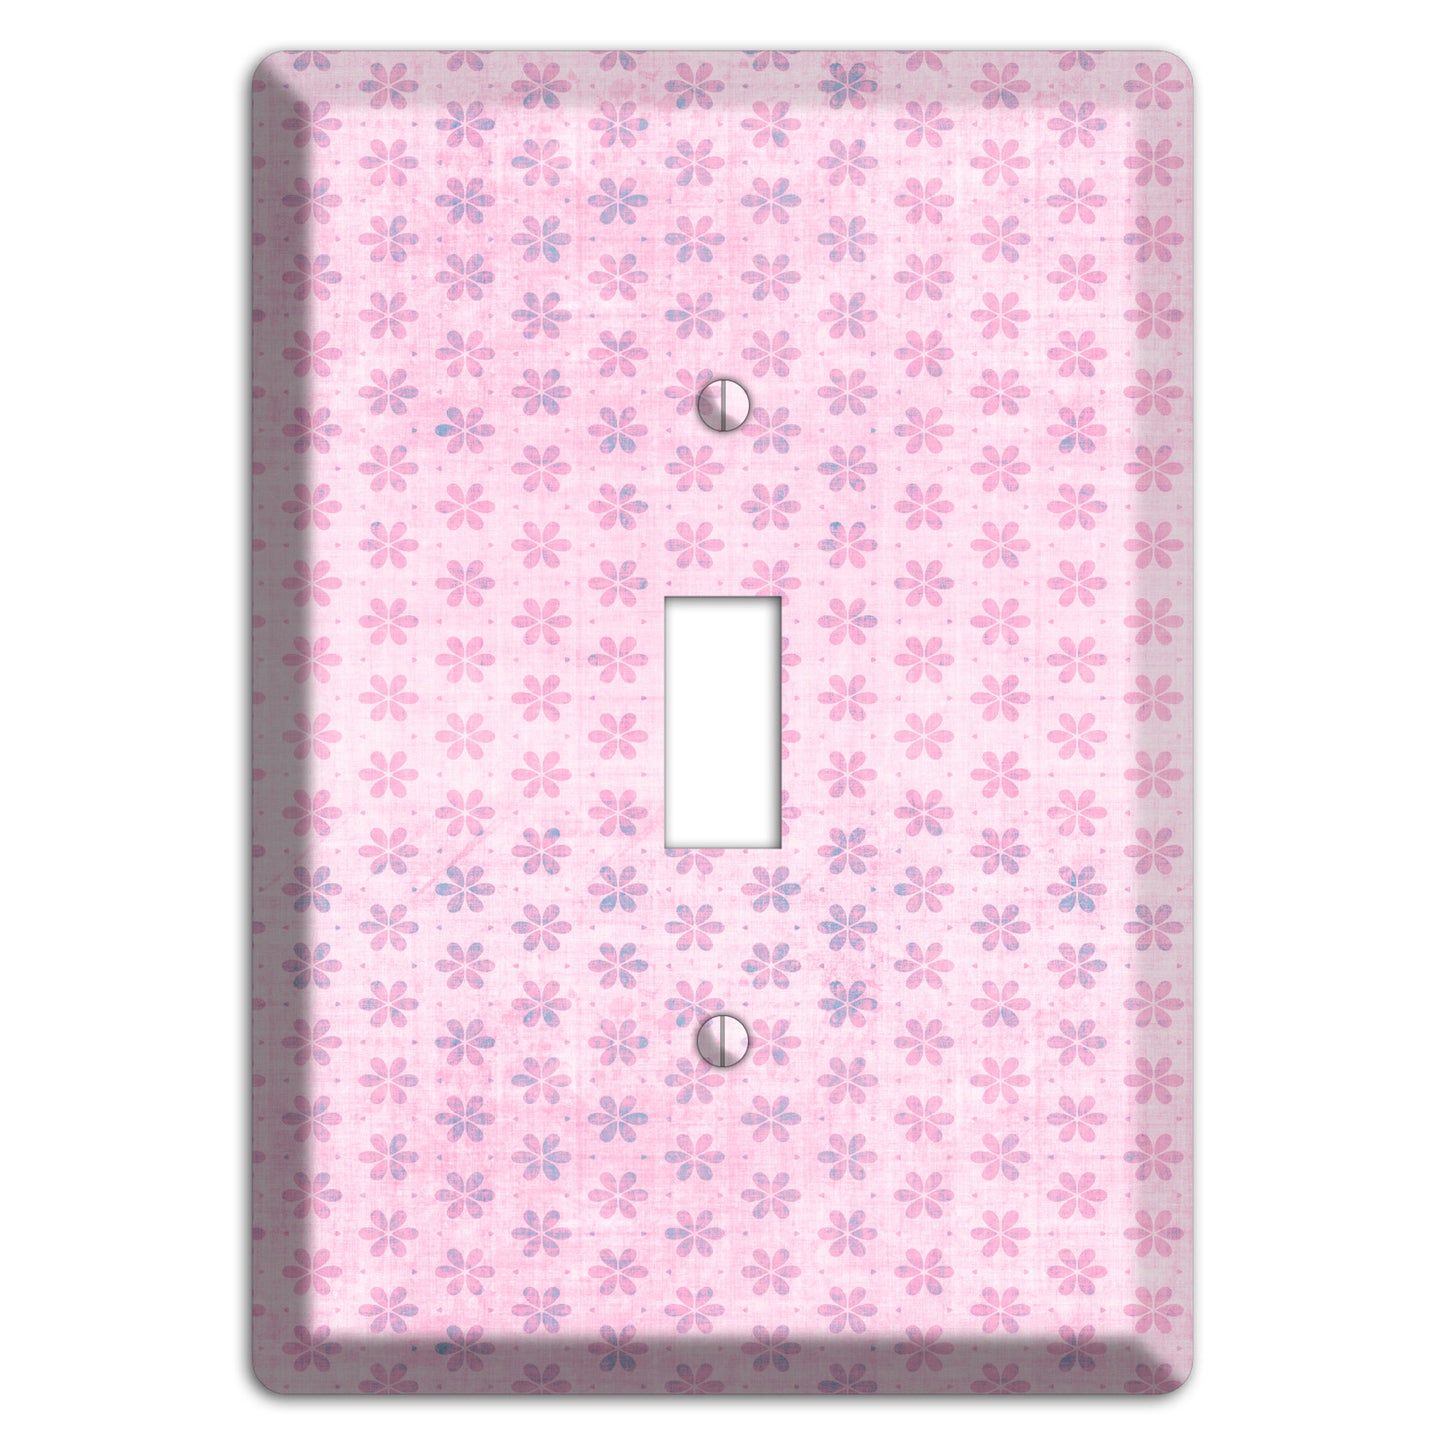 Pink Grunge Floral Contour Cover Plates